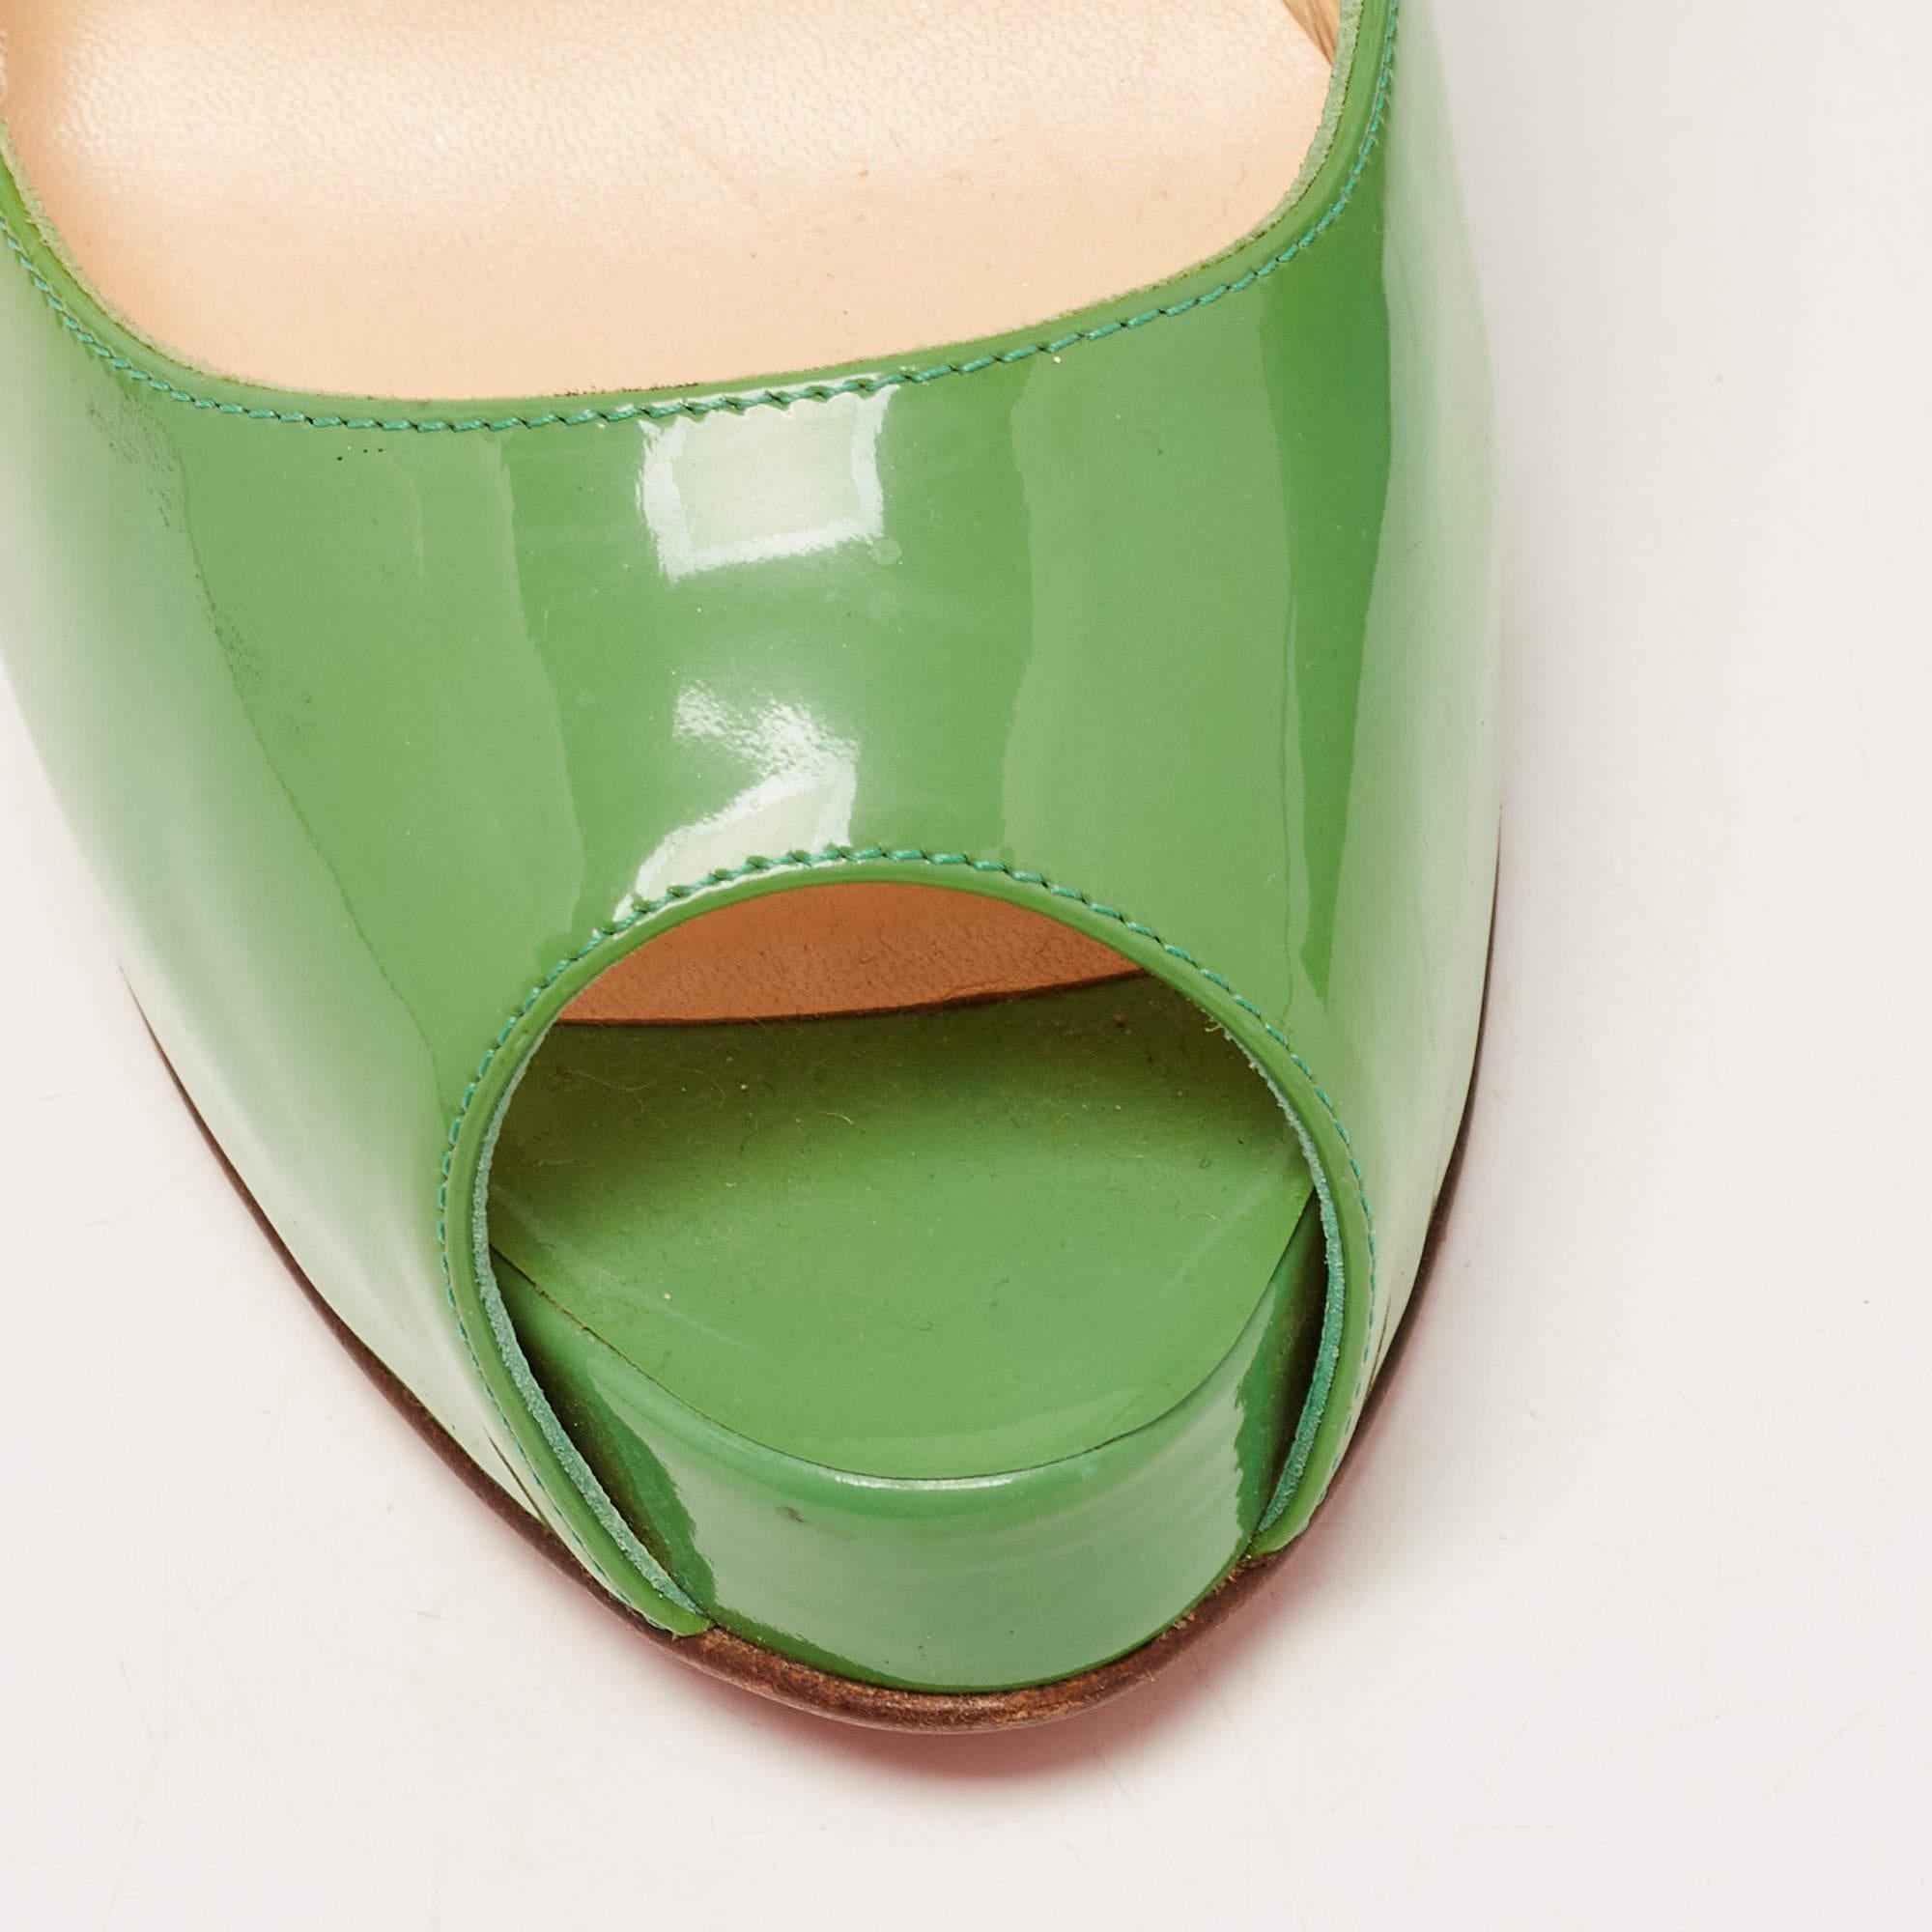 Christian Louboutin Green Patent Leather Very Prive Pumps Size 38.5 For Sale 8